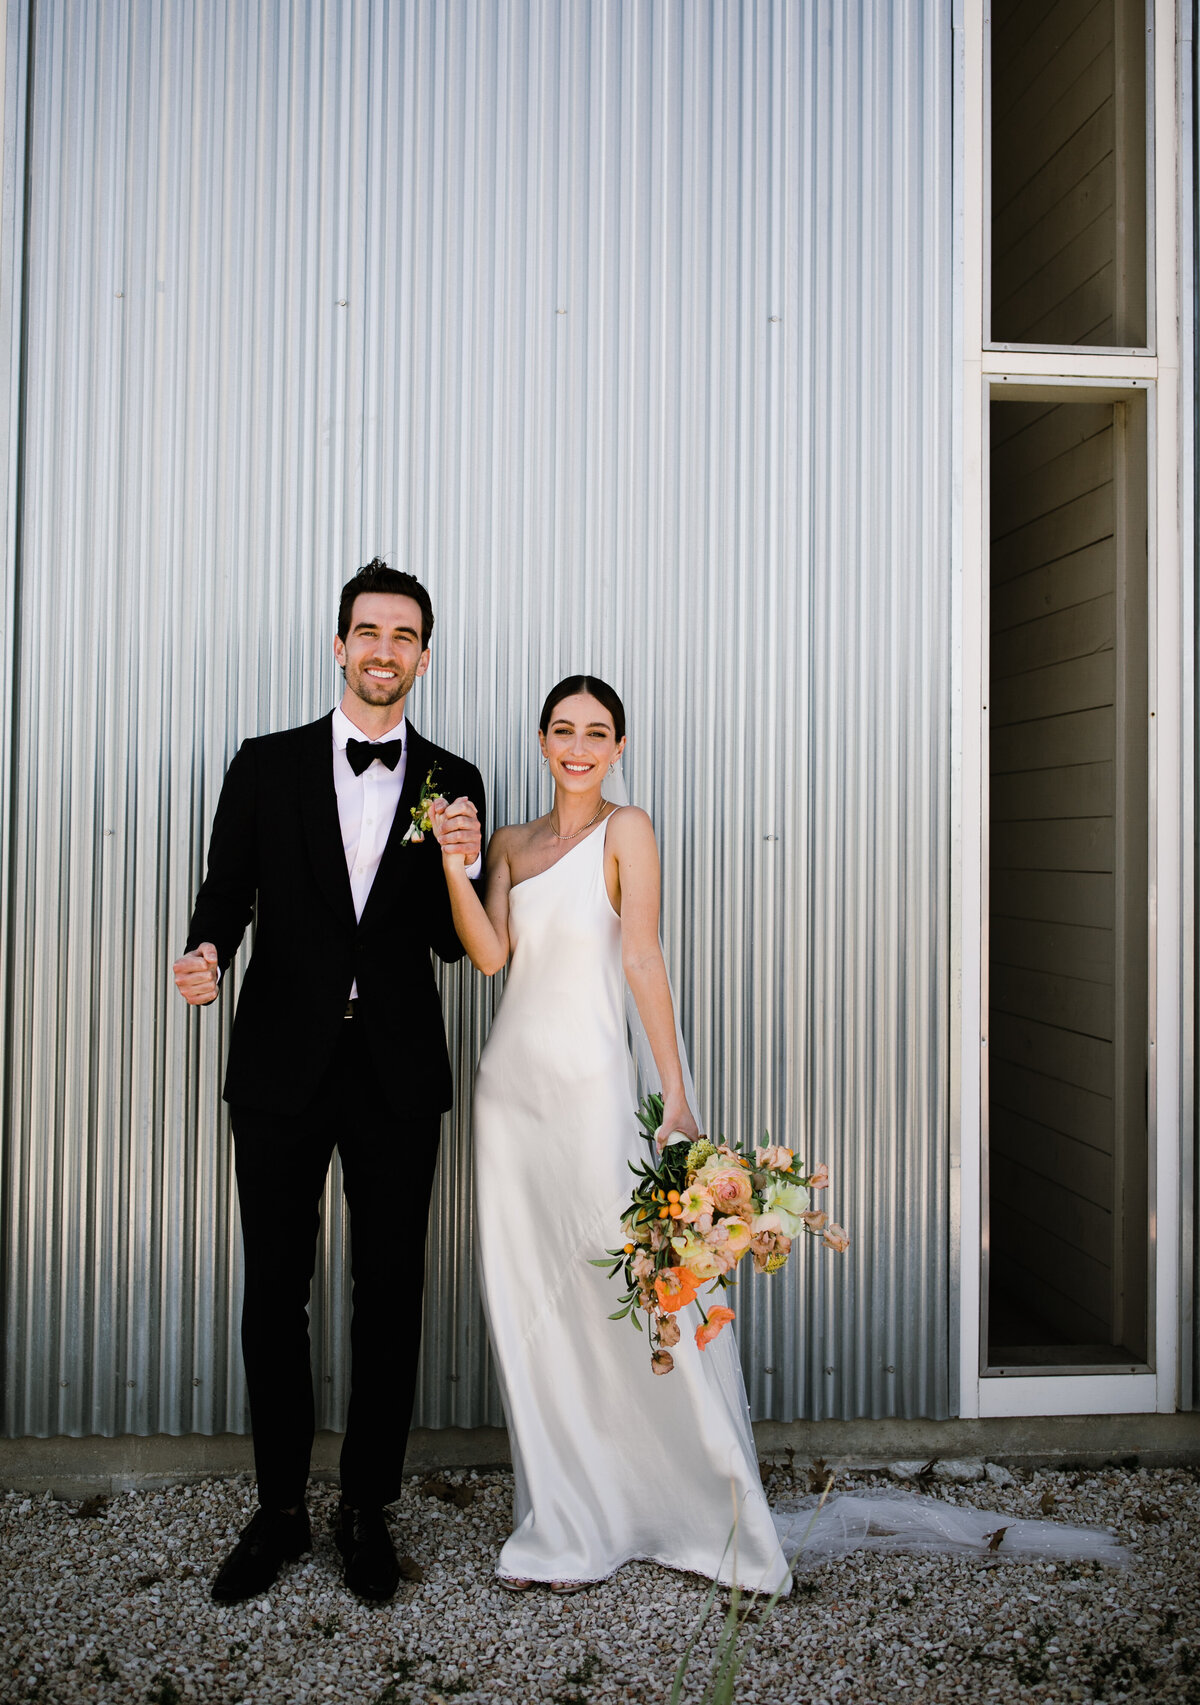 Bride and groom outside Prospect house, holding yellow and orange florals